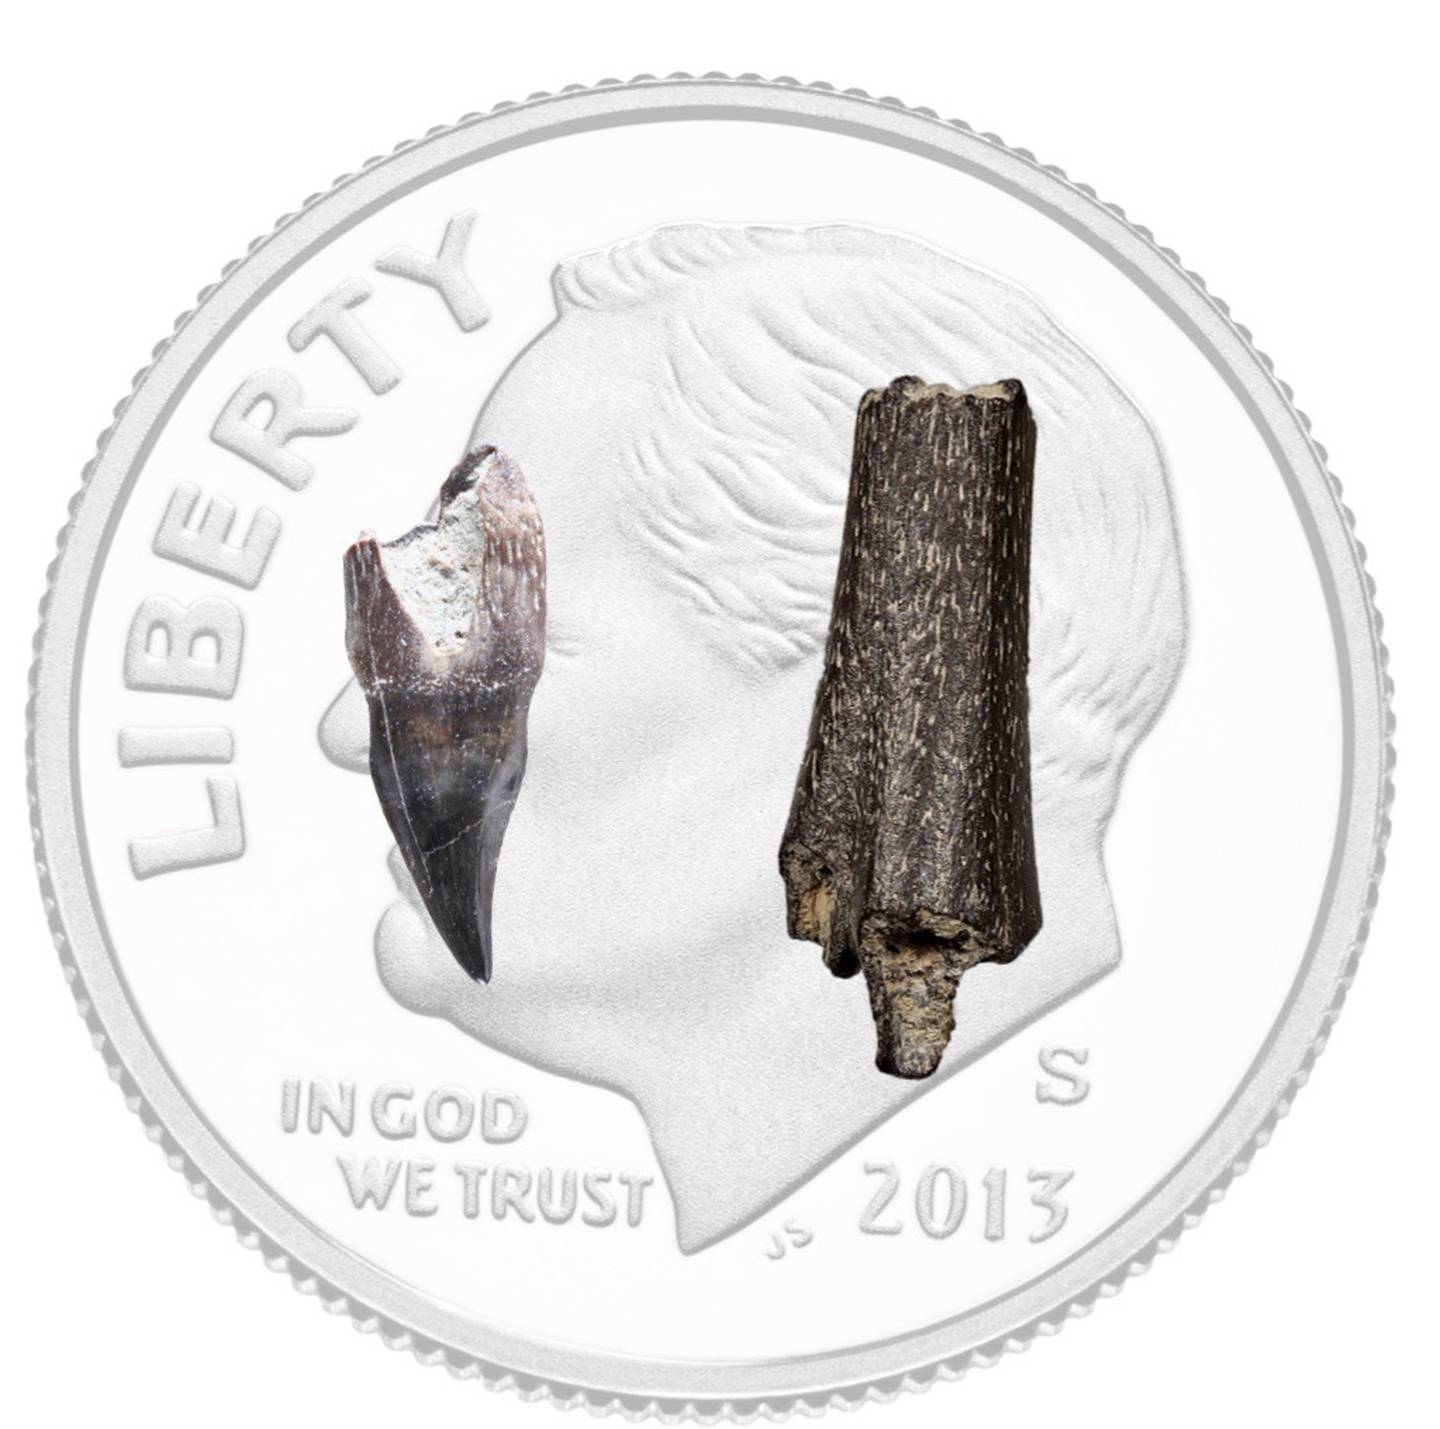 A fragment of a bird tooth as well as a bird bone researchers found in the bluffs above the Colville River with a dime for comparison